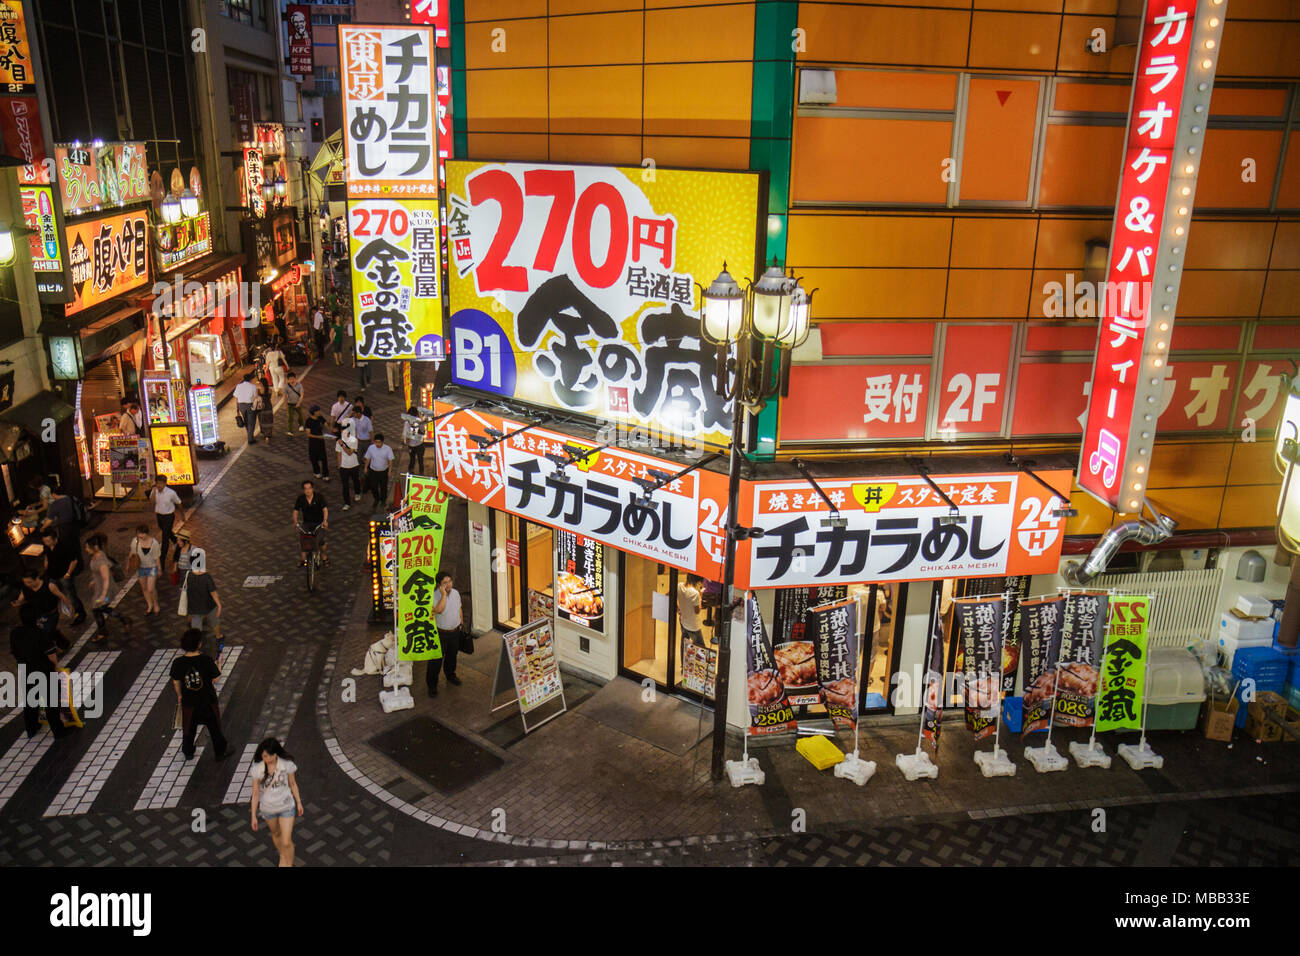 Tokyo Japan,Asia,Orient,Ikebukuro,kanji,characters,pedestrian mall arcade,restaurant restaurants food dining eating out cafe cafes bistro,night nightl Stock Photo